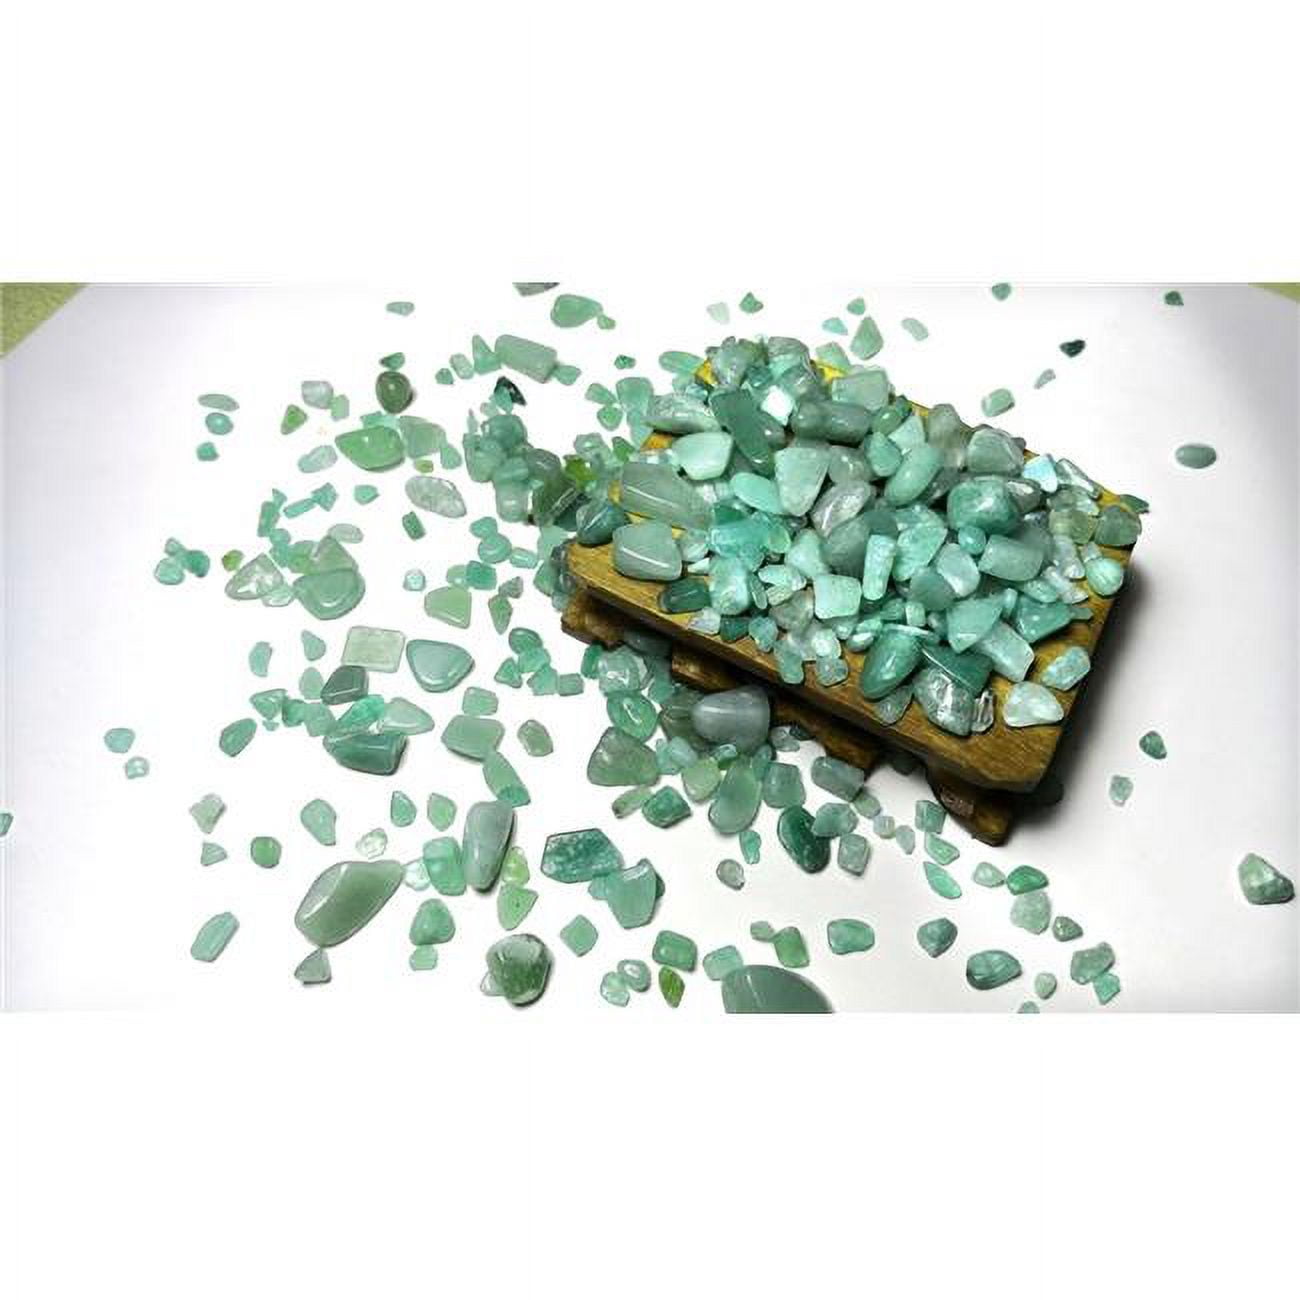 Picture of AZ Trading & Import RK460G 1 lbs Green Aveturine Tumbled Chips Stone